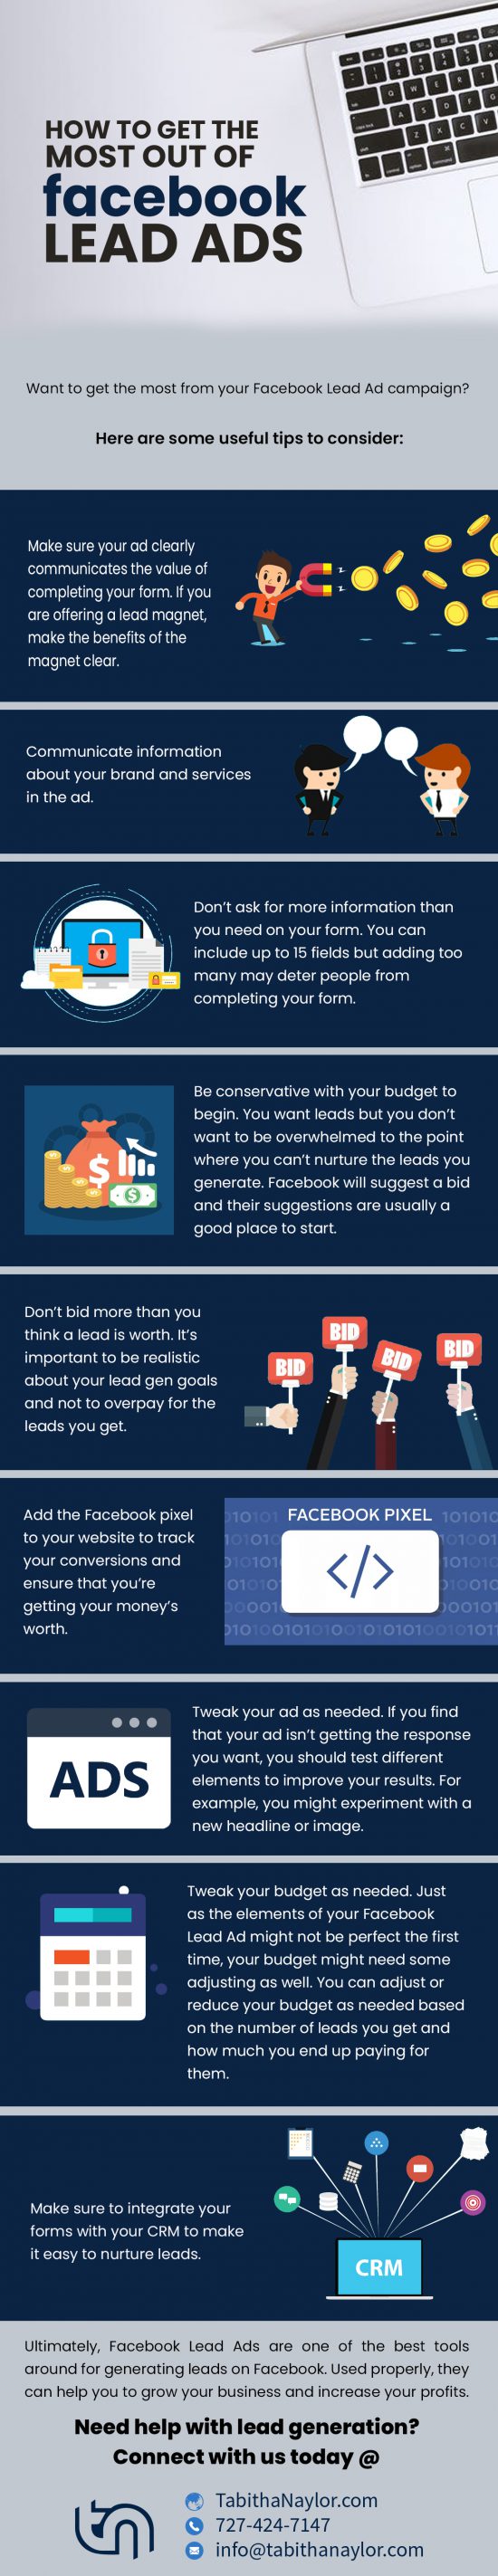 How-to-Get-the-Most-Out-of-Facebook-Lead-Ads-550x2846  